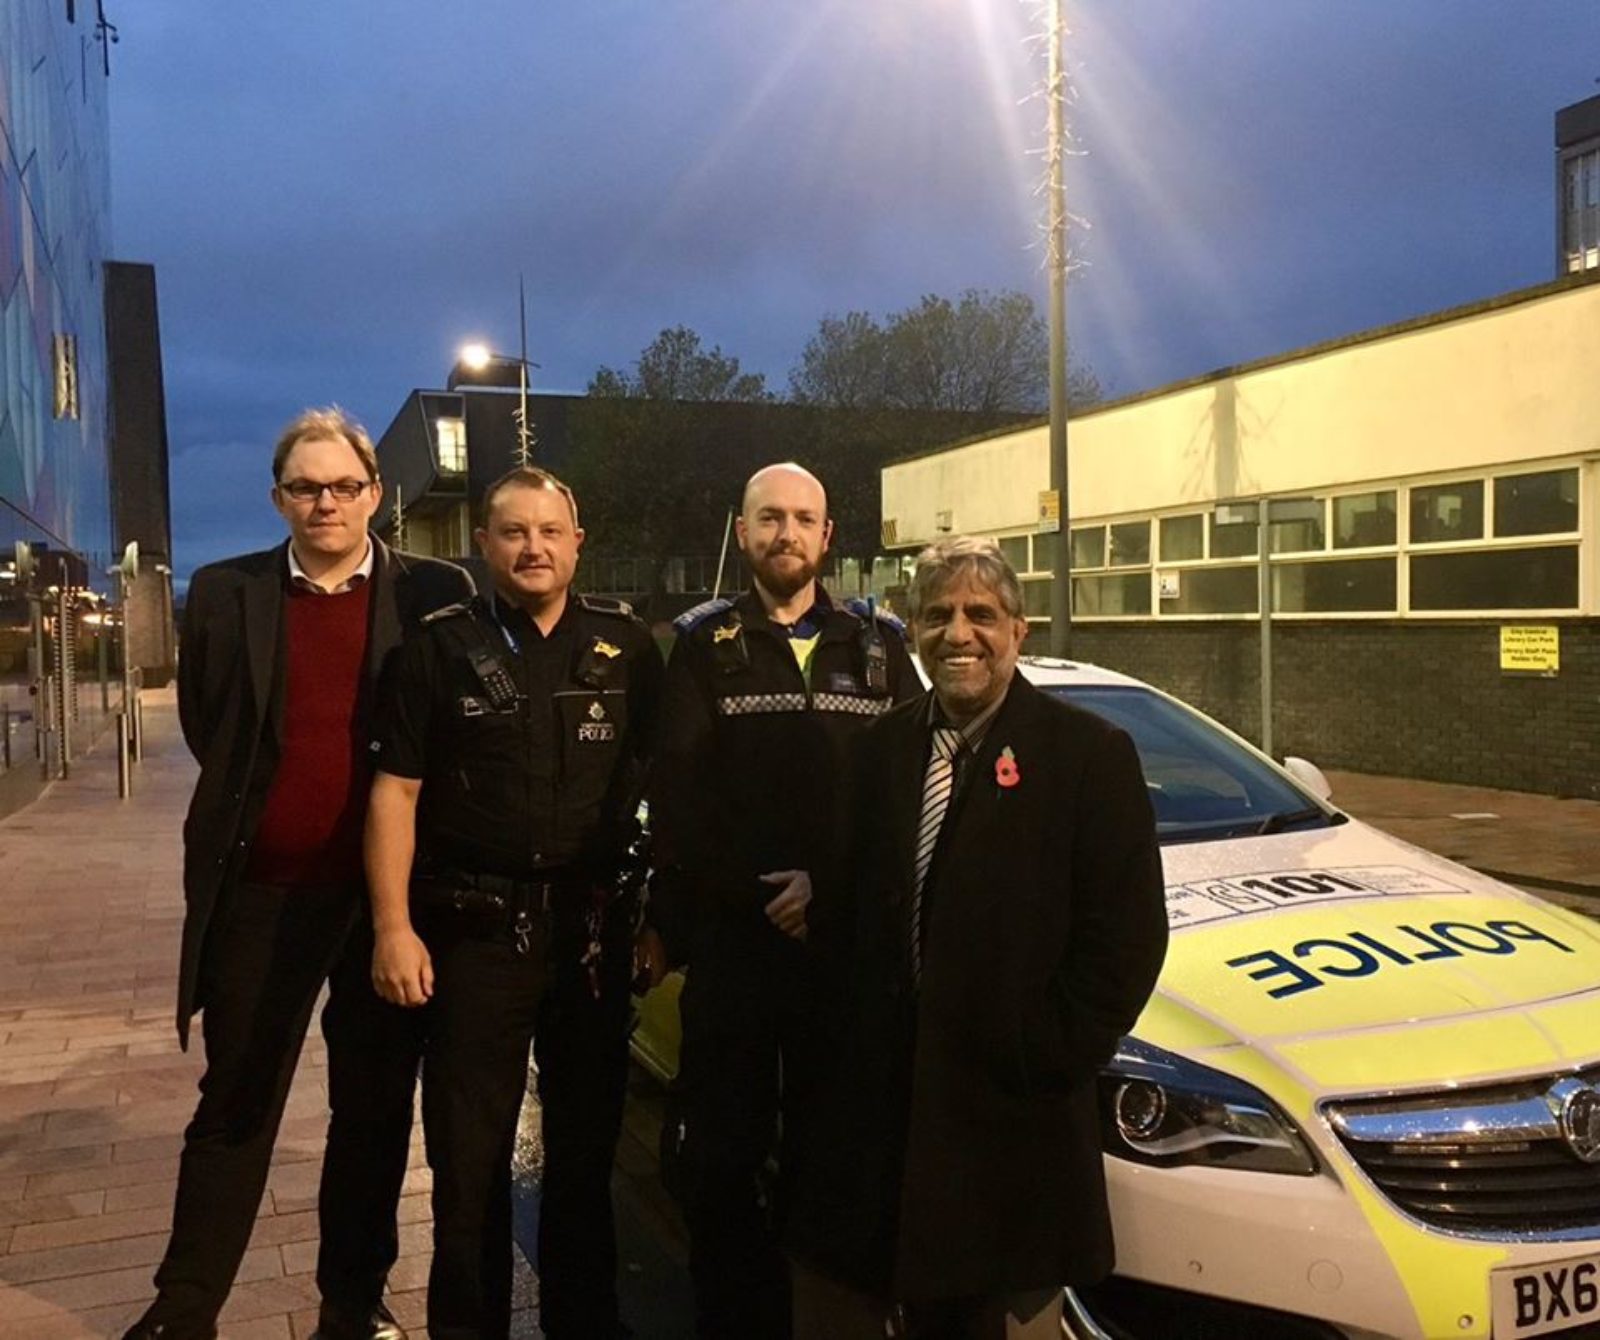 Gareth with two police officers and Councillor Khan, in Shelton.